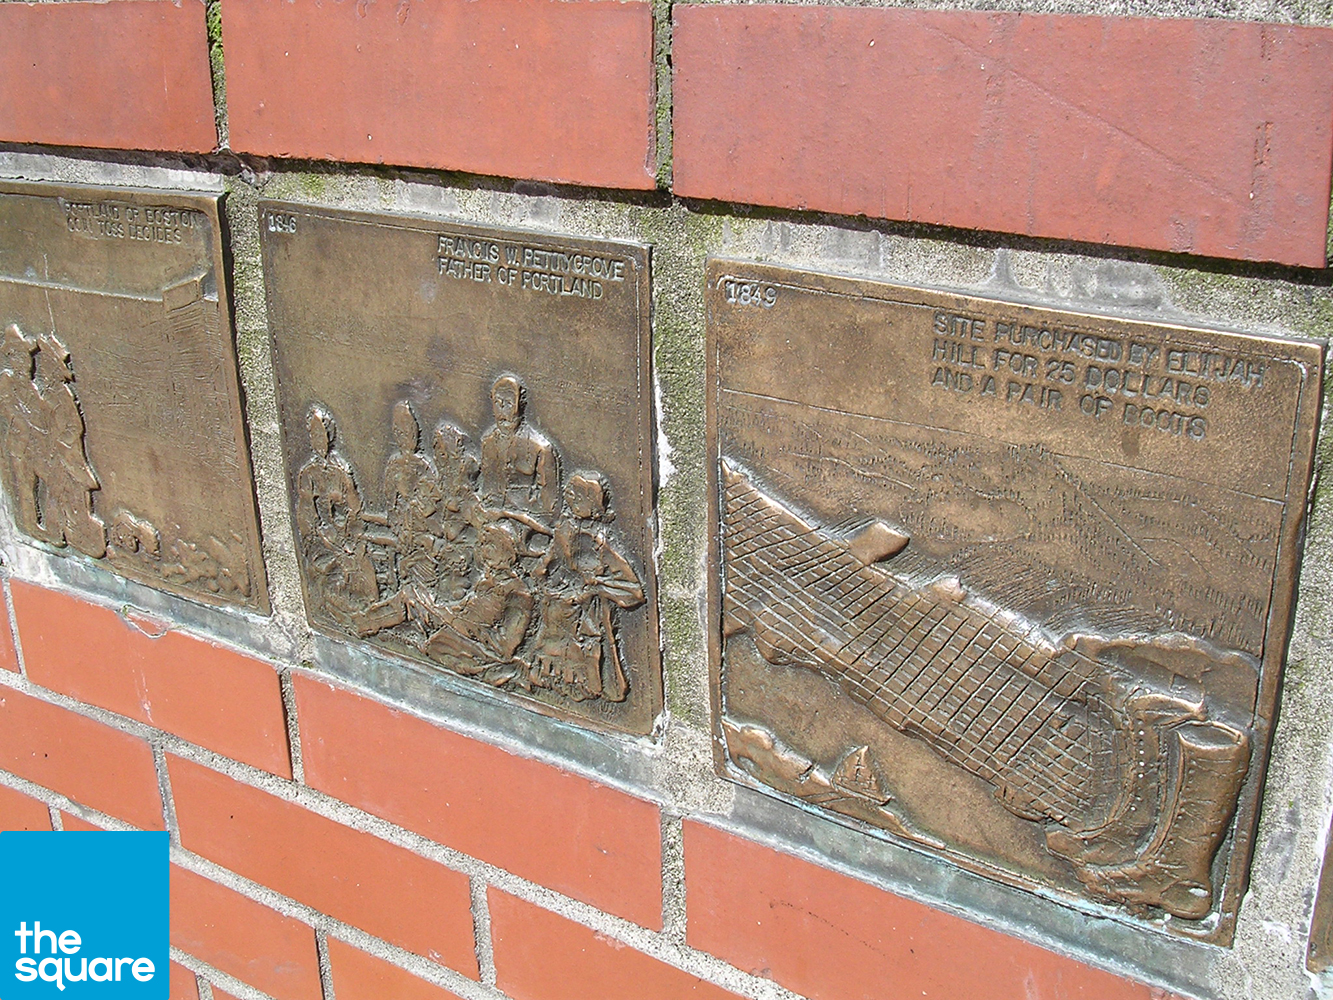 Historic Tiles - Also located in the Small Amphitheater are bronze tiles, handmade by Gail Martin, depicting scenes from Portland’s Past.